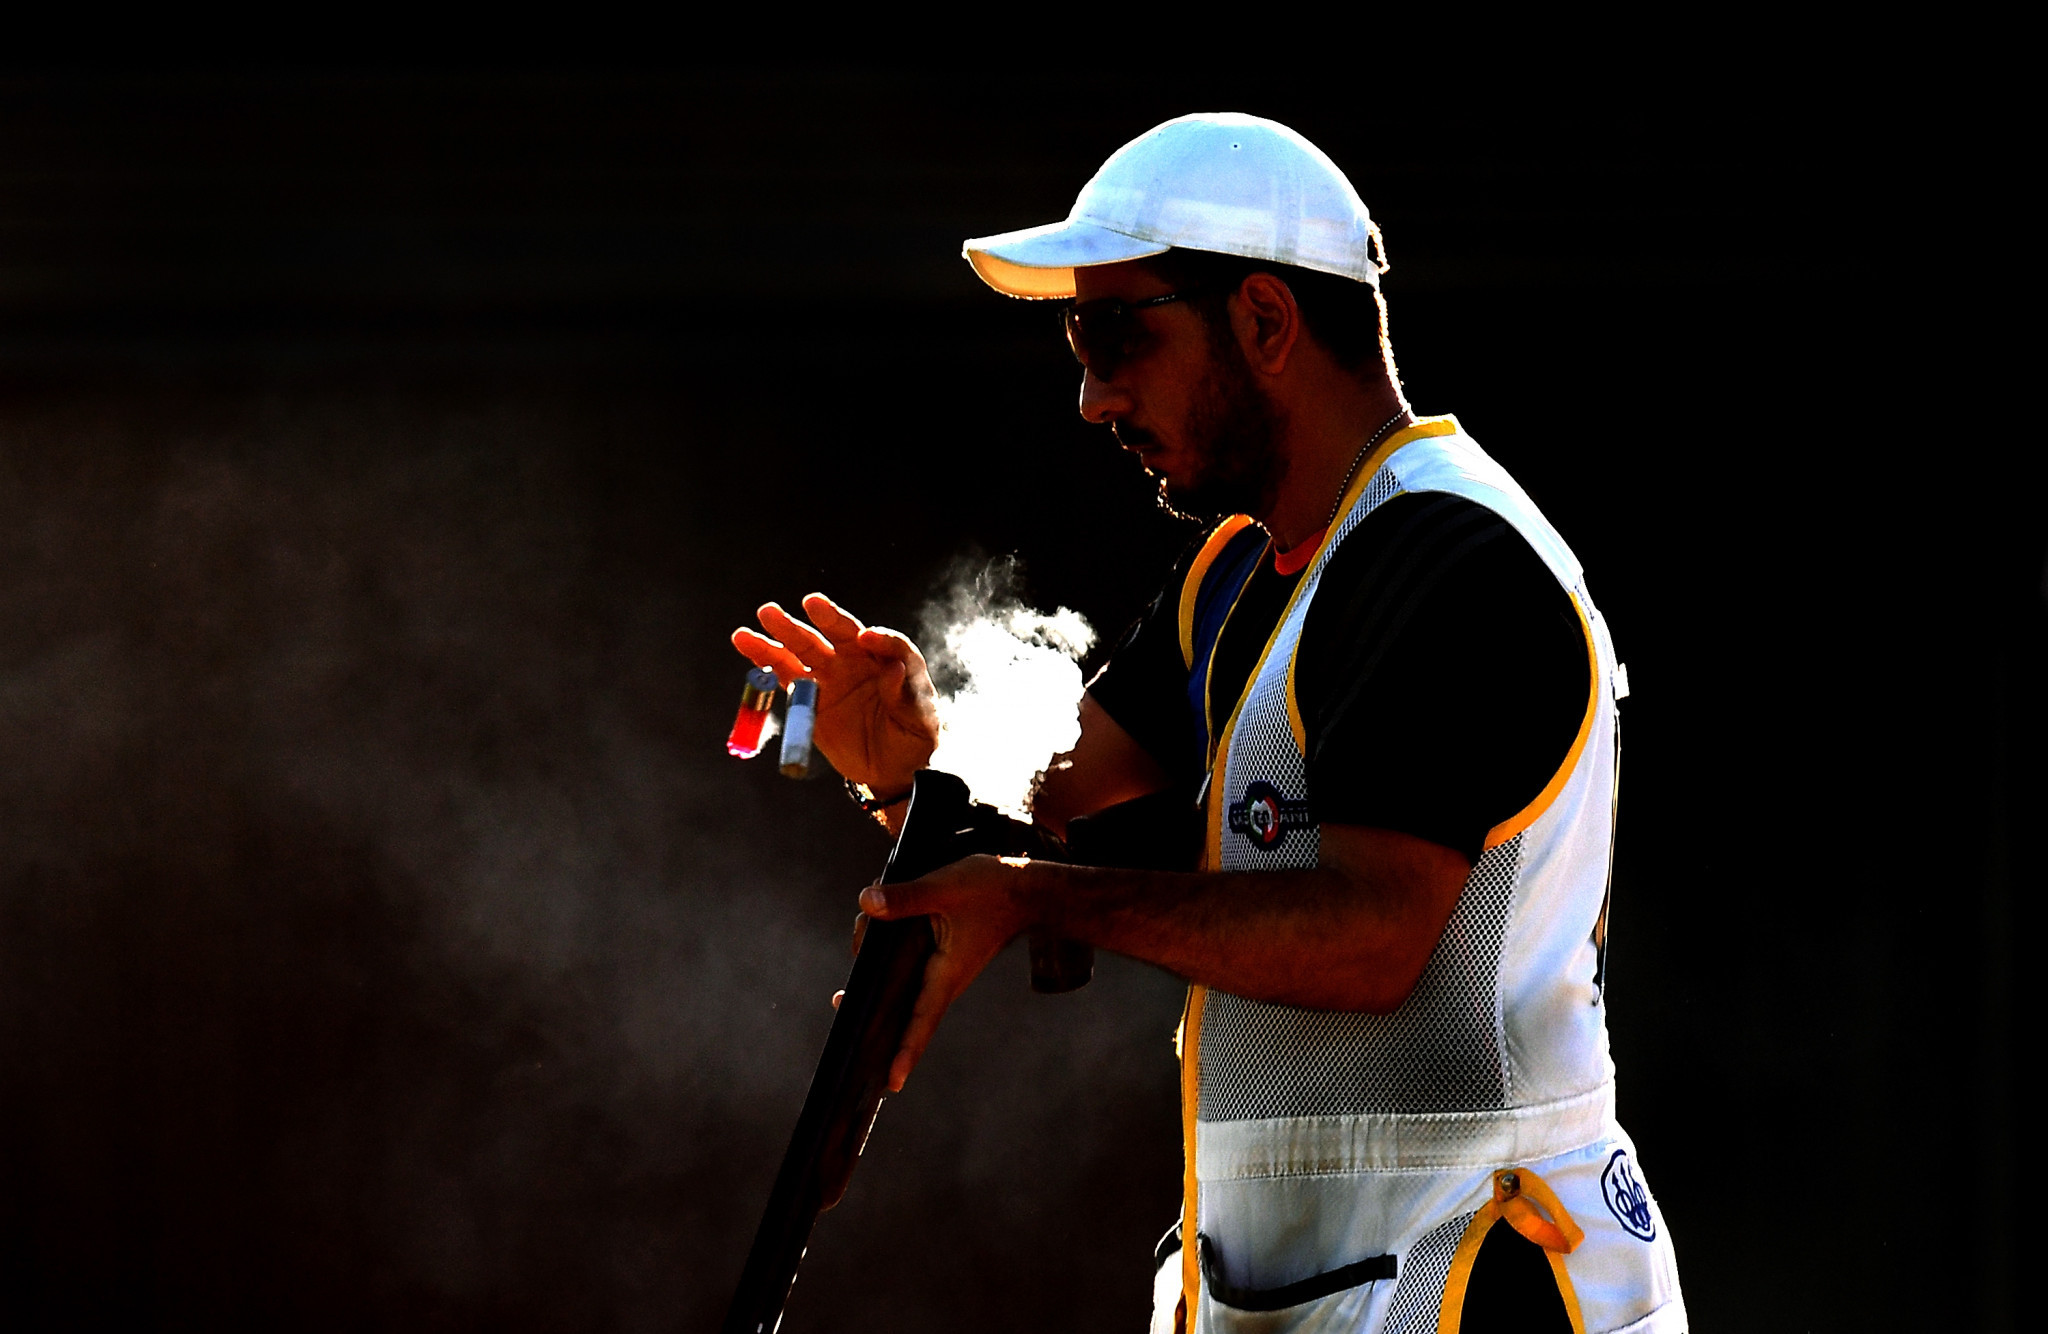 Georgios Achilleos is set to compete in the men's skeet competition ©Getty Images